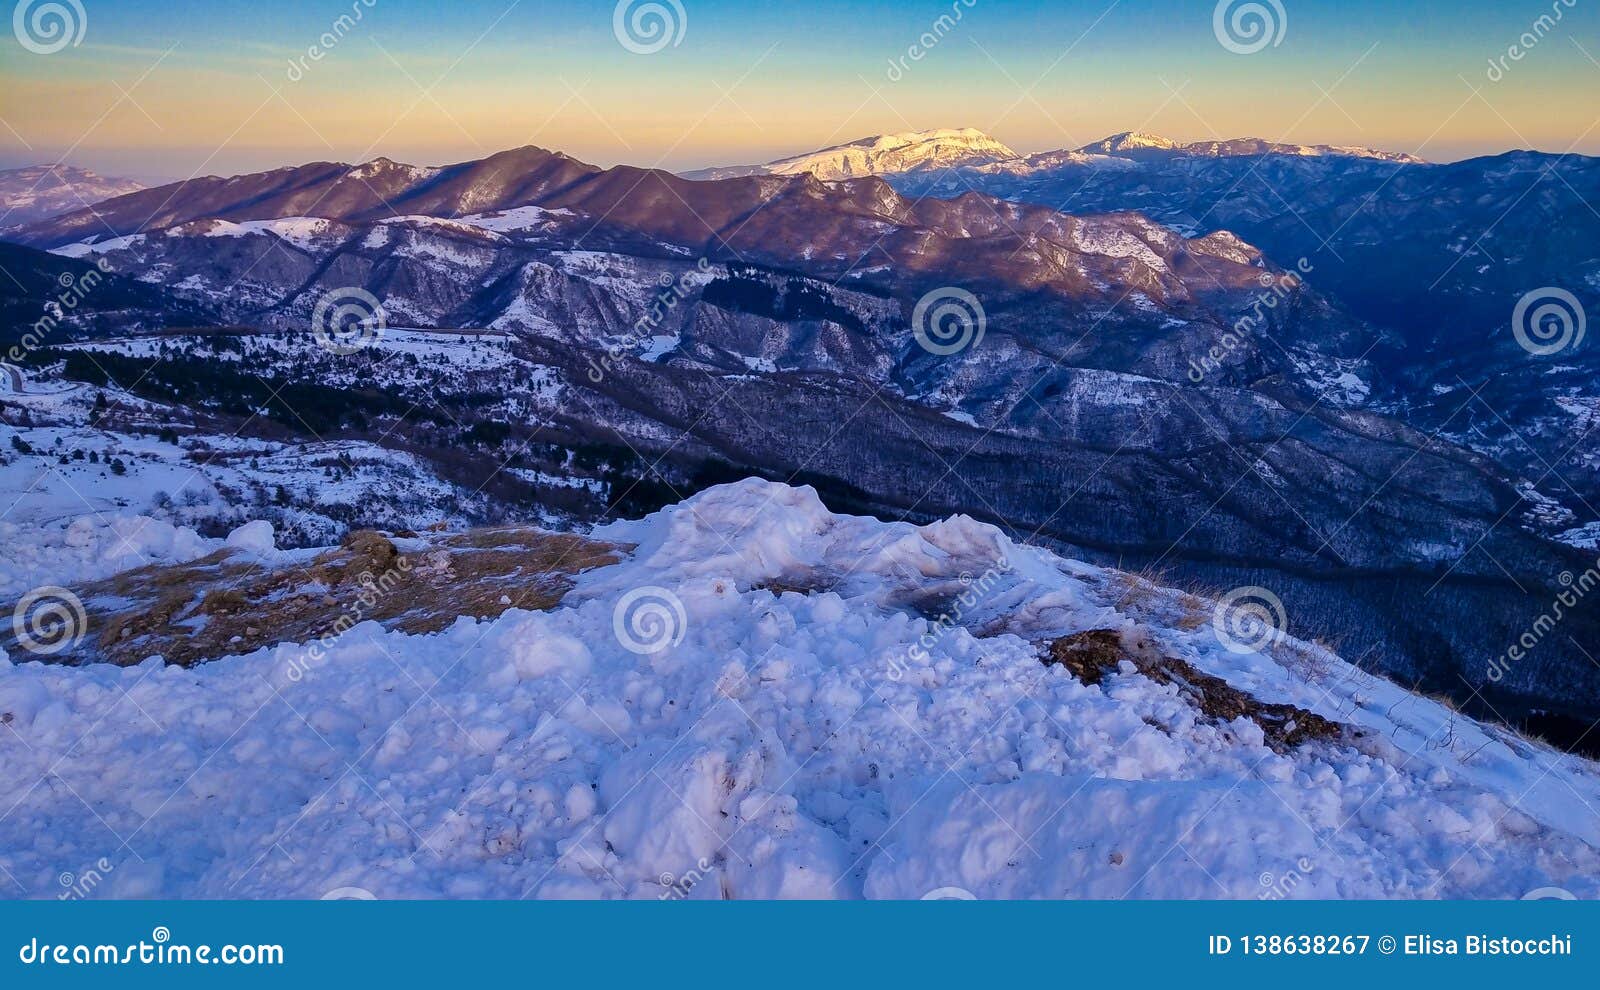 panoramic view from vettore mountain at sunset